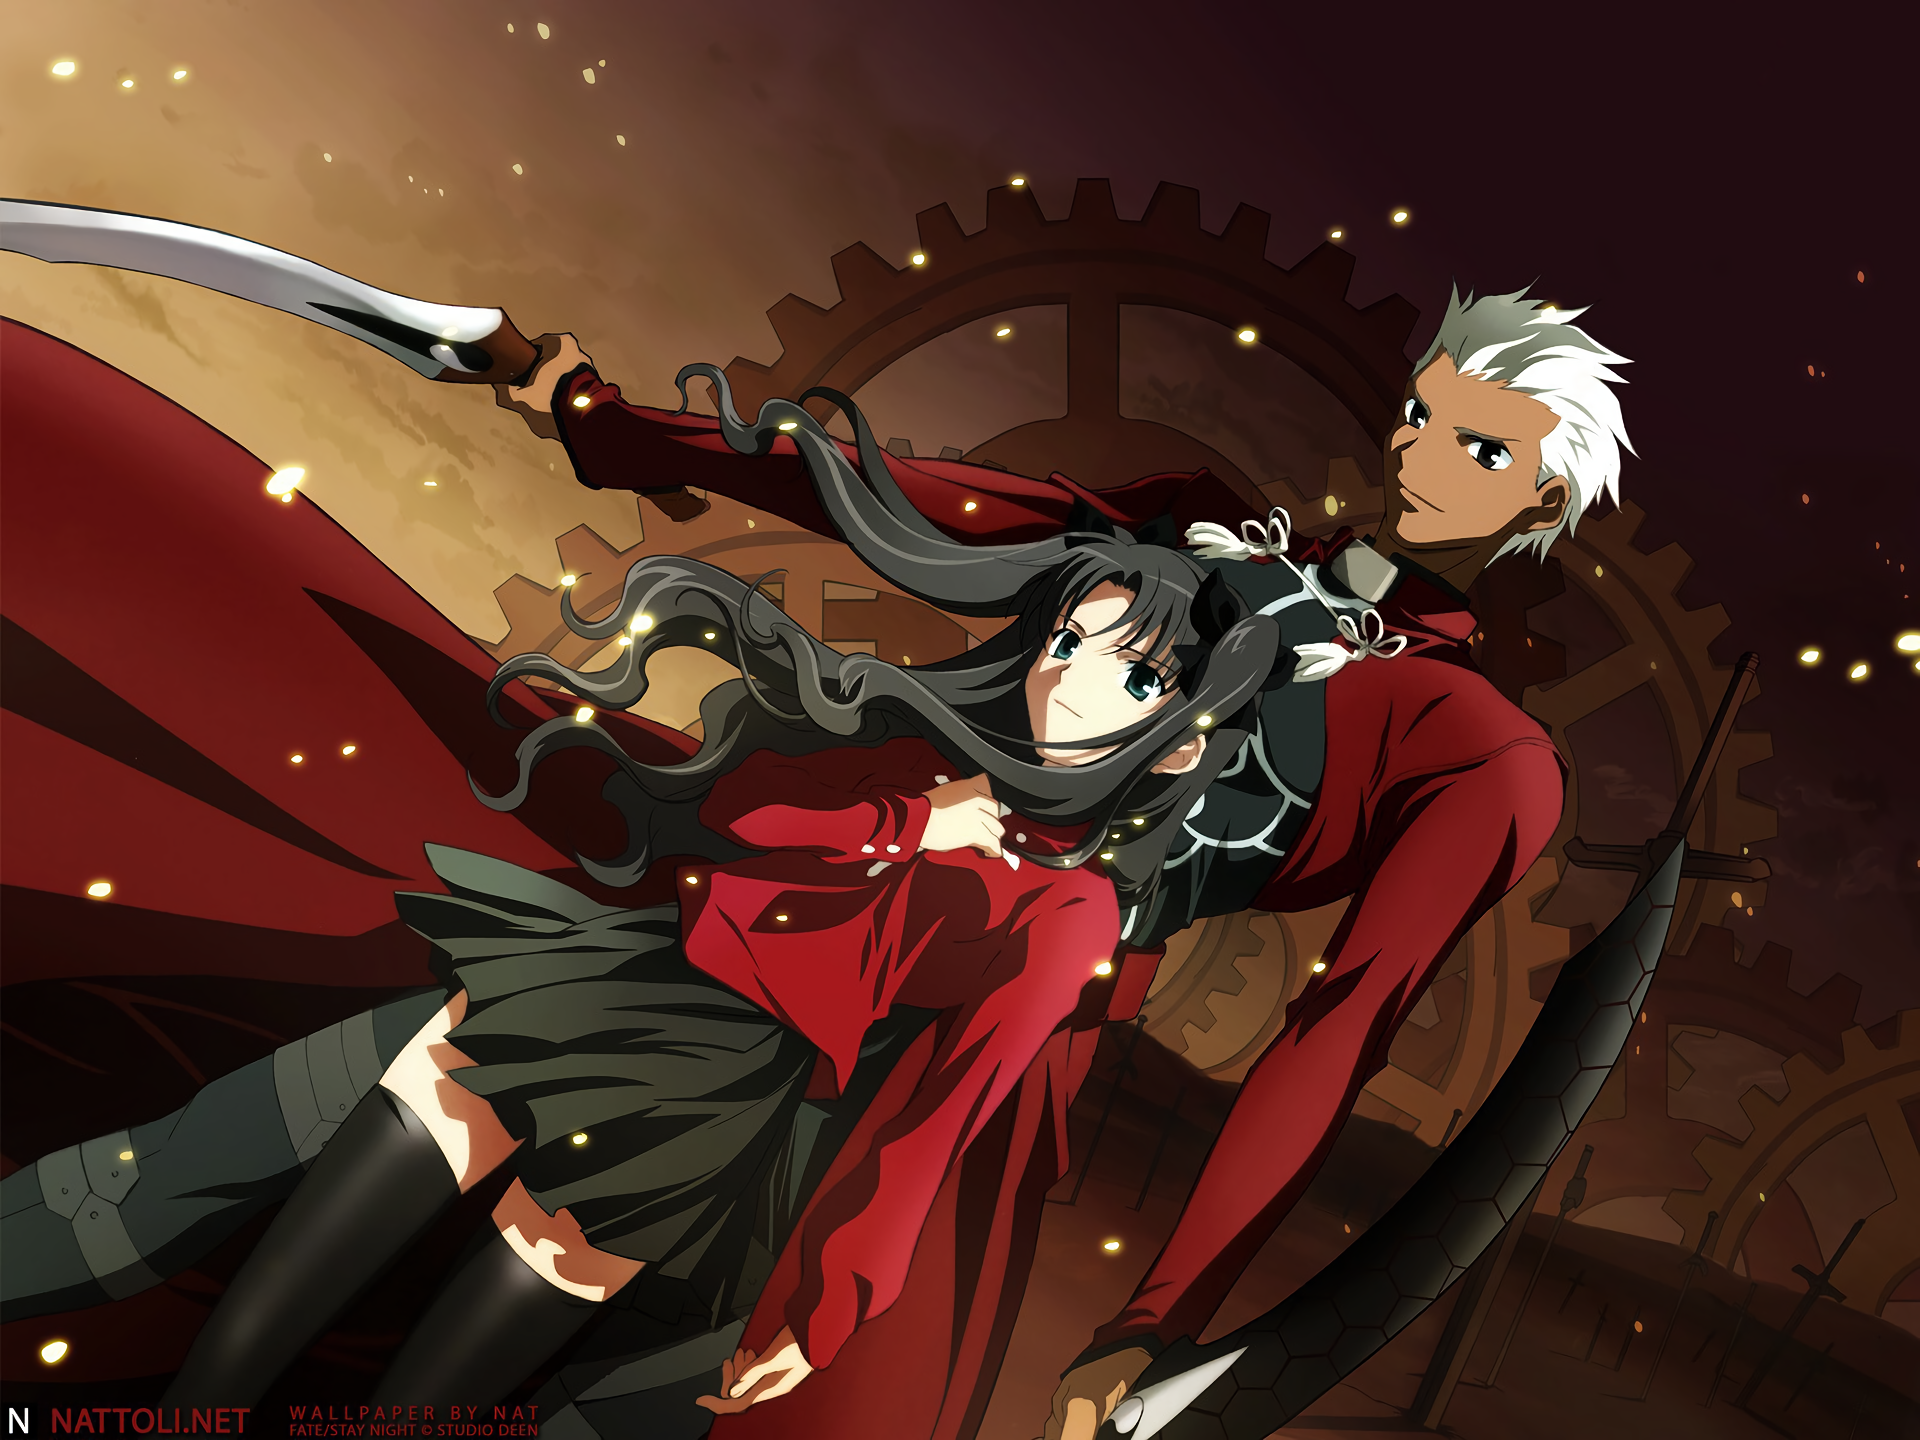 Rin Tohsaka and Archer from Fate/Stay Night engage in an intense battle on a vibrant background.